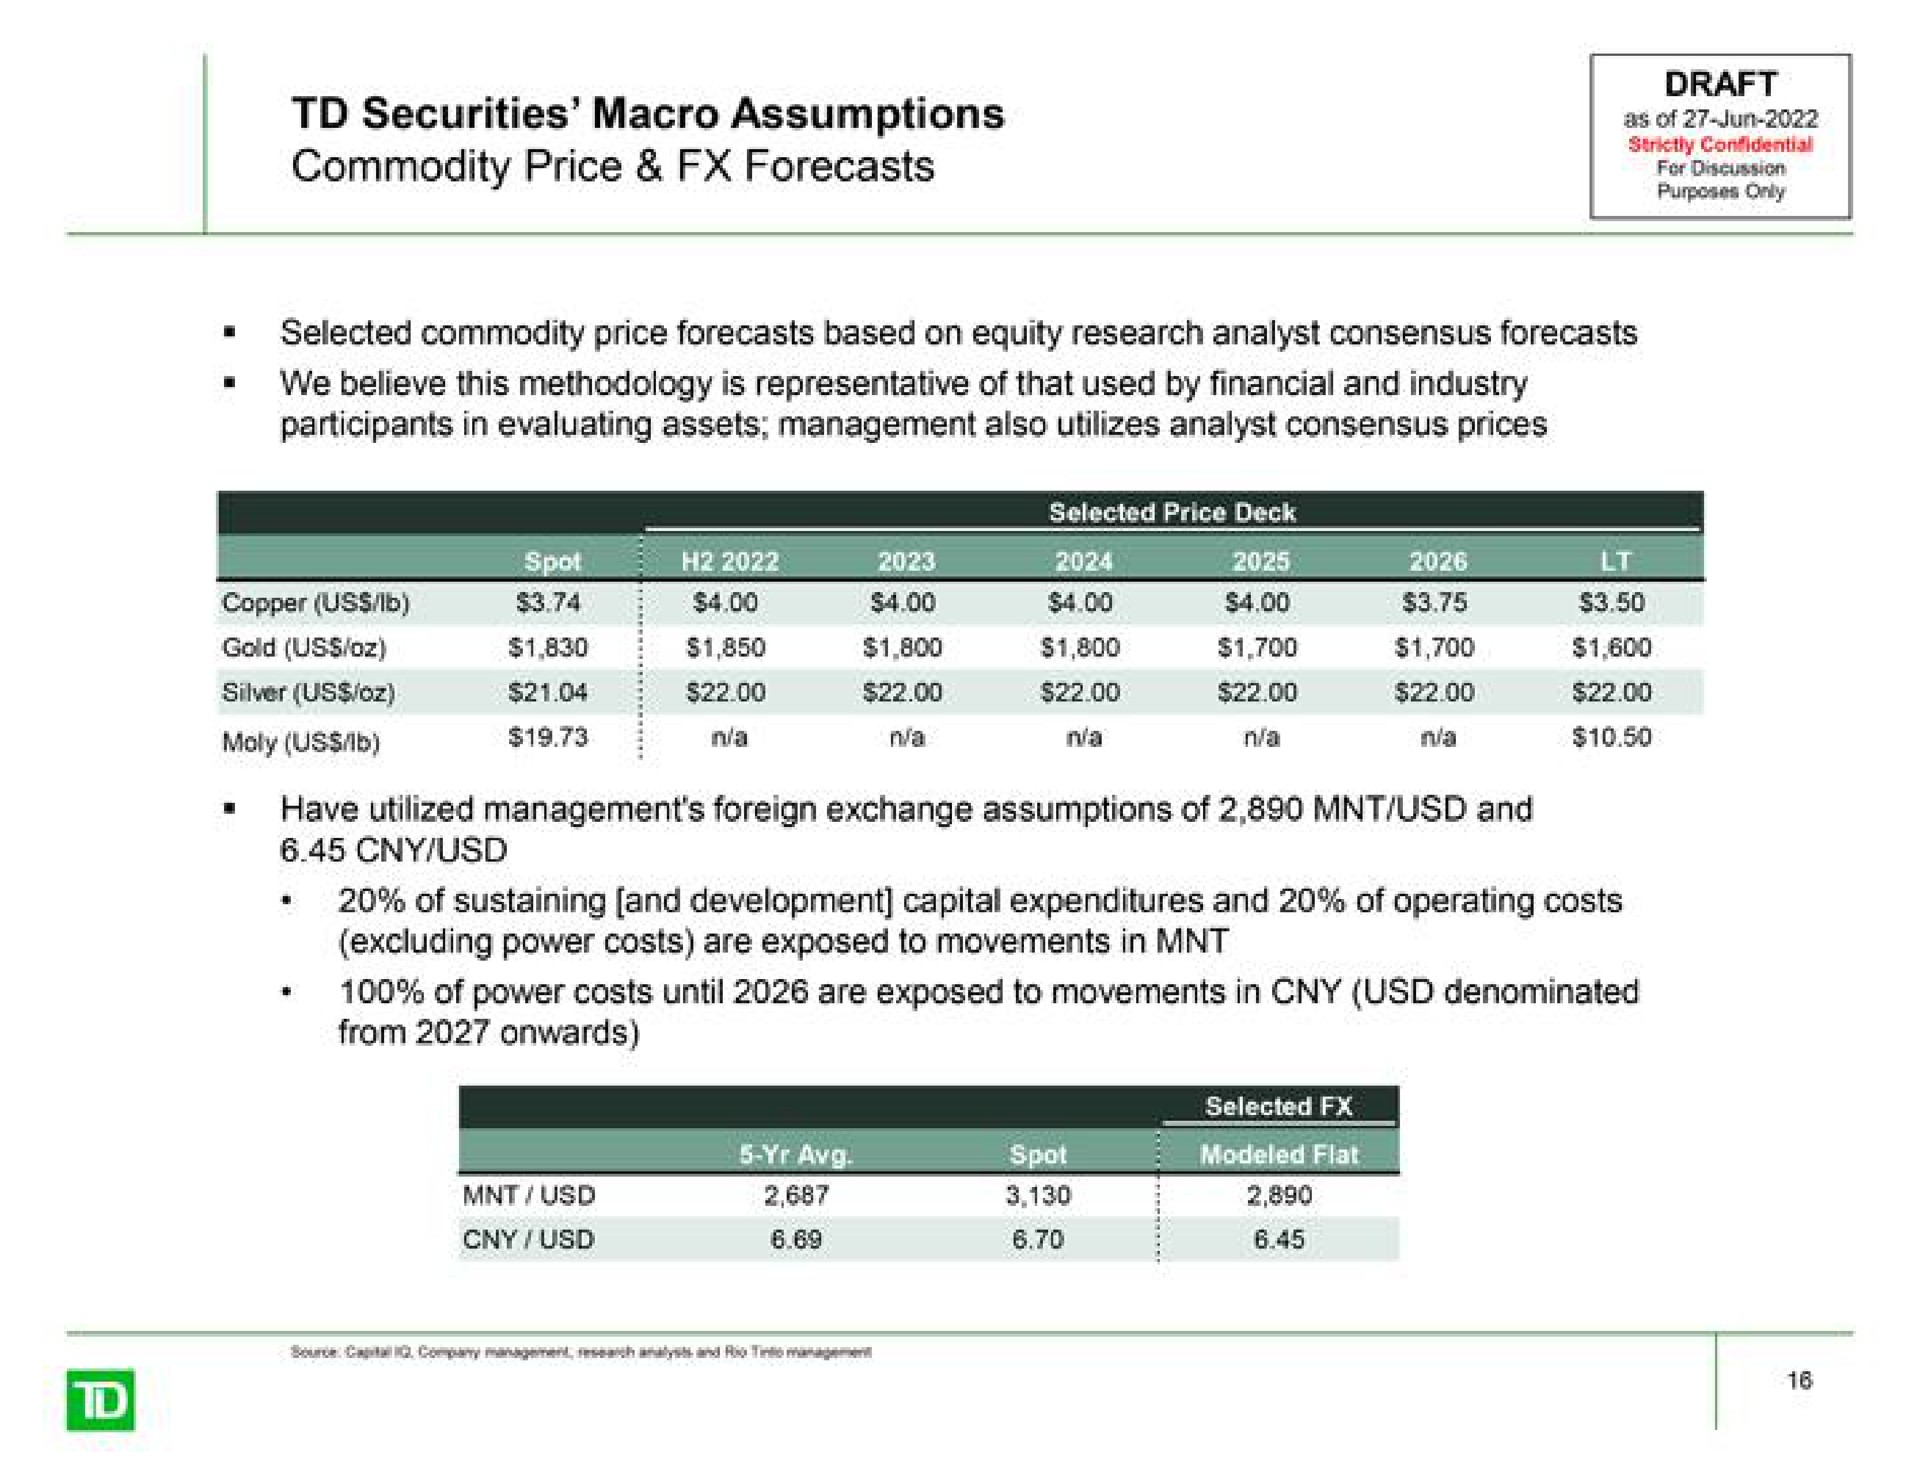 securities macro assumptions commodity price forecasts draft as of copper gold us silver us of sustaining and development capital expenditures and of operating costs from onwards | TD Securities